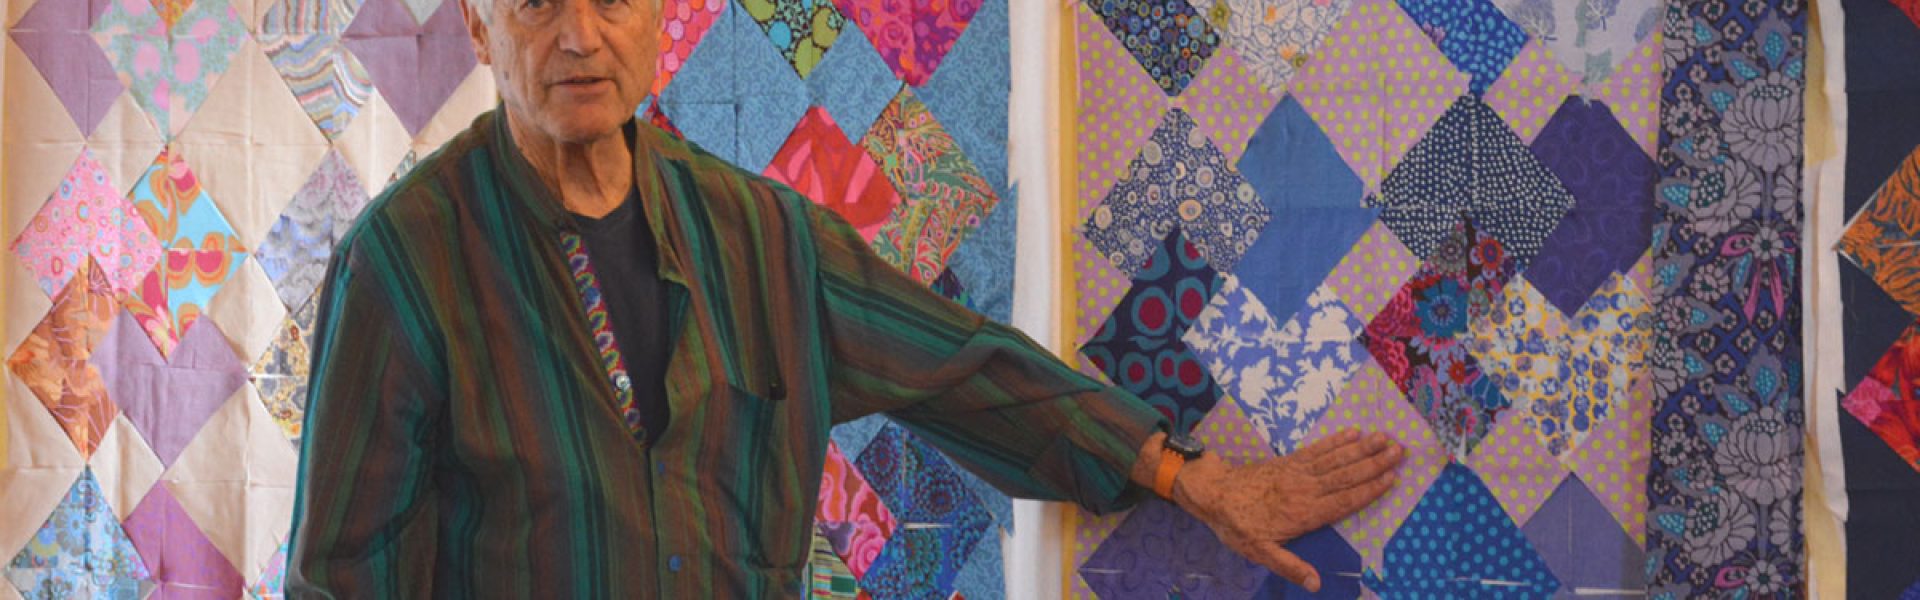 Kaffe Fassett talk to the School of Stitched Textiles about 'Creating in Colour'